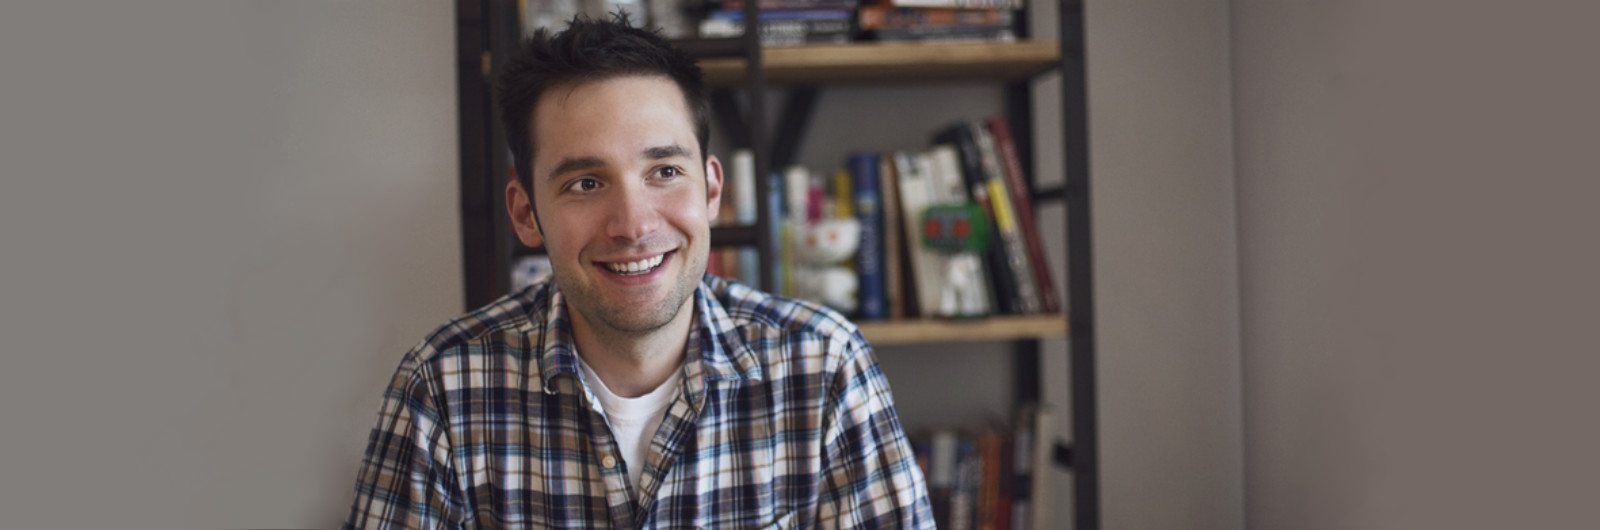 Alexis Ohanian, Founder of Reddit